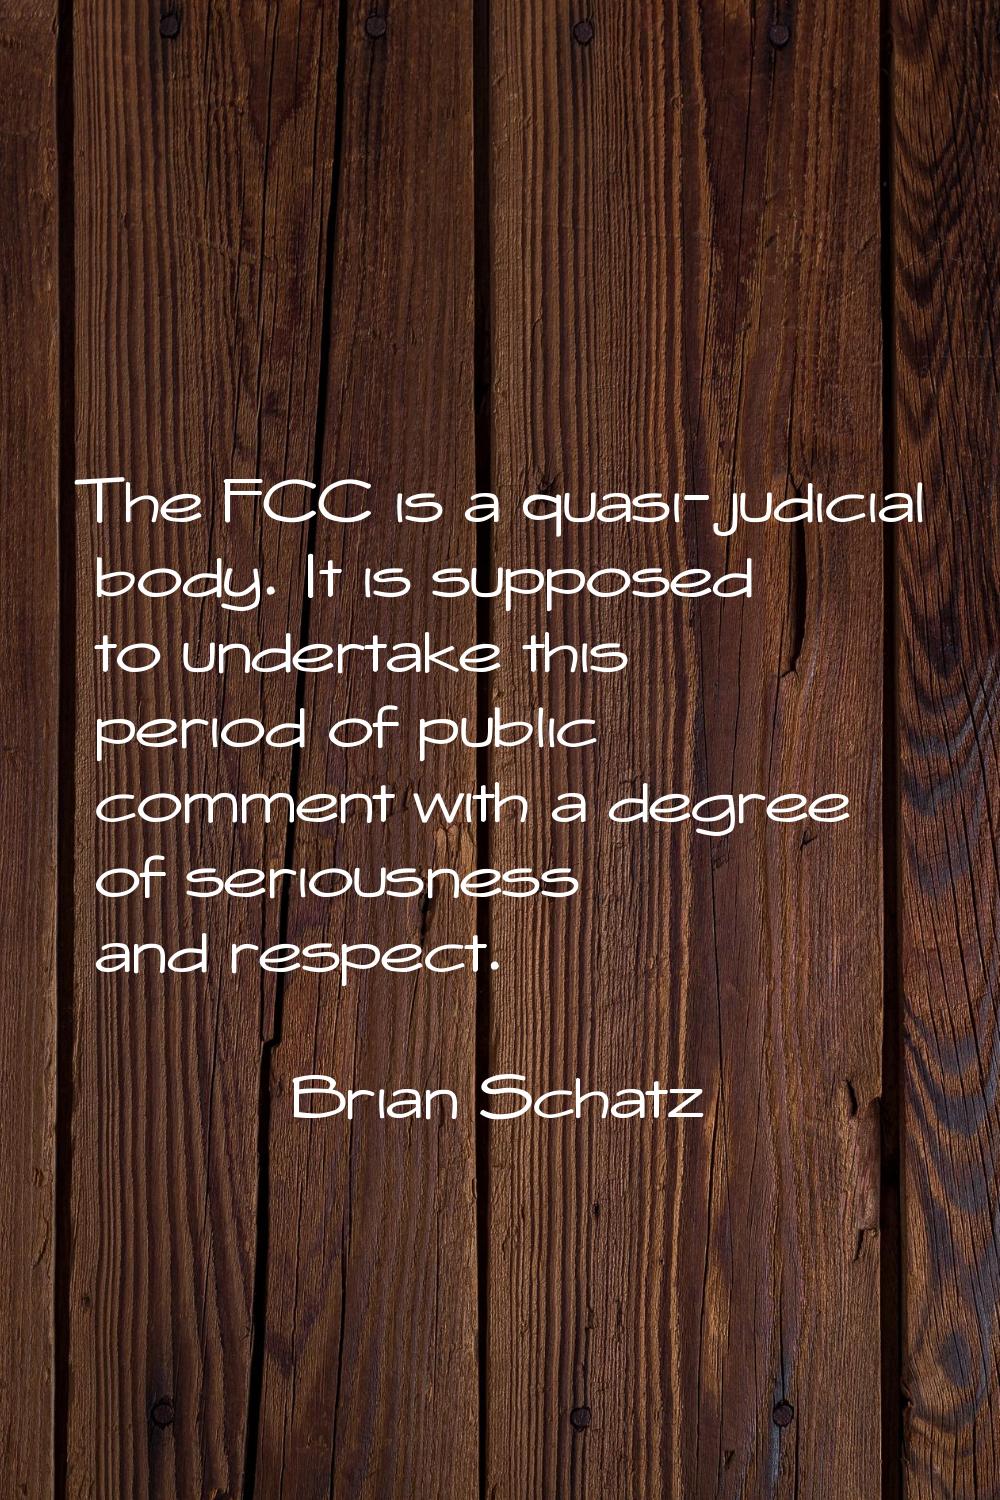 The FCC is a quasi-judicial body. It is supposed to undertake this period of public comment with a 